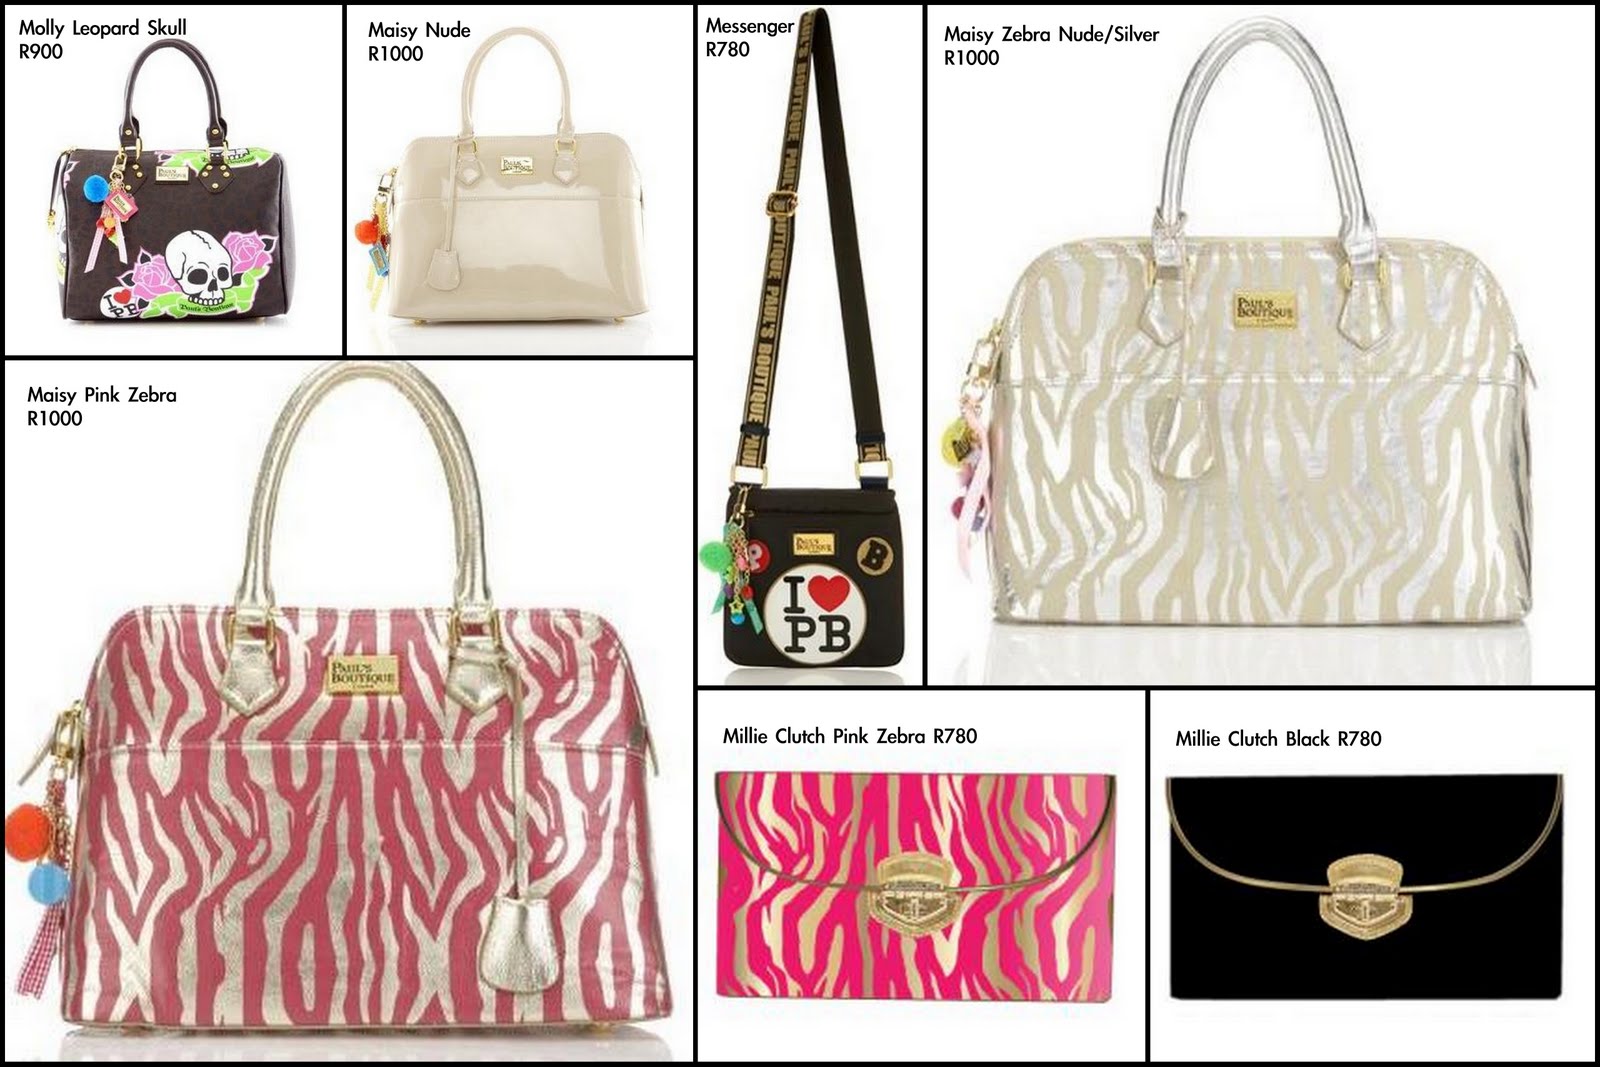 Frills and Thrills: 50% Off Paul's Boutique Bags